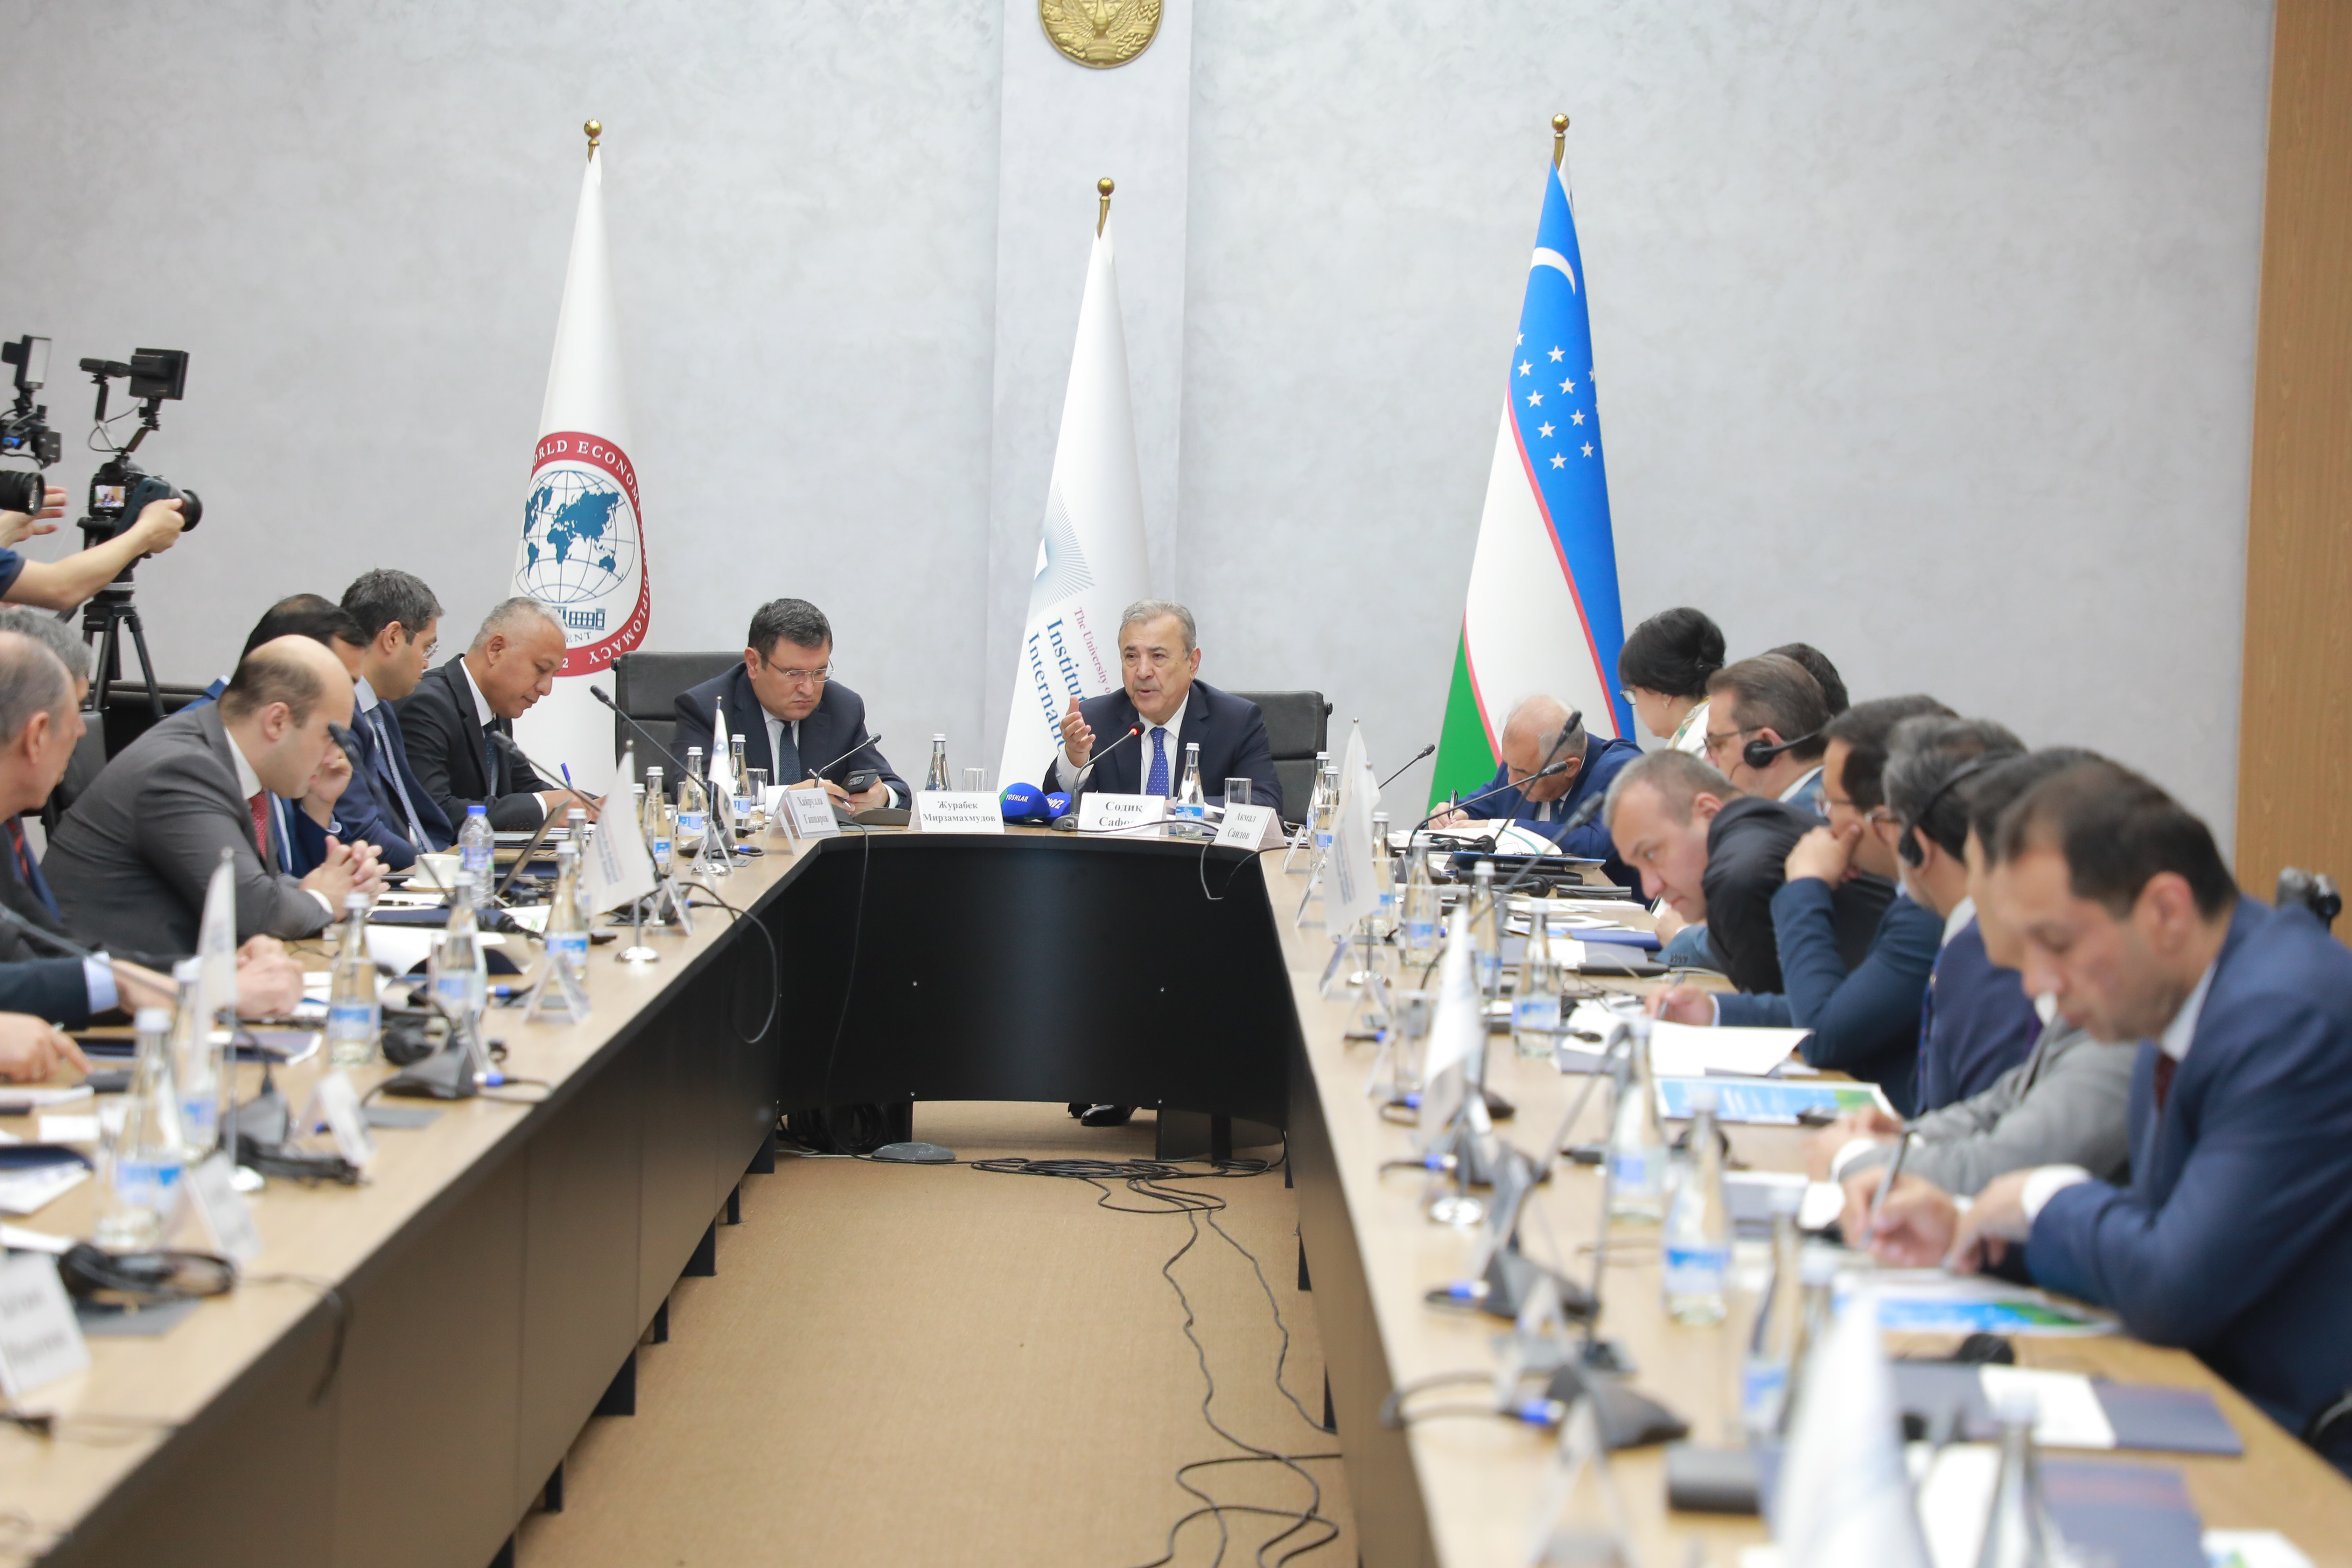 An international round table on energy issues was held at the University of World Economy and Diplomacy